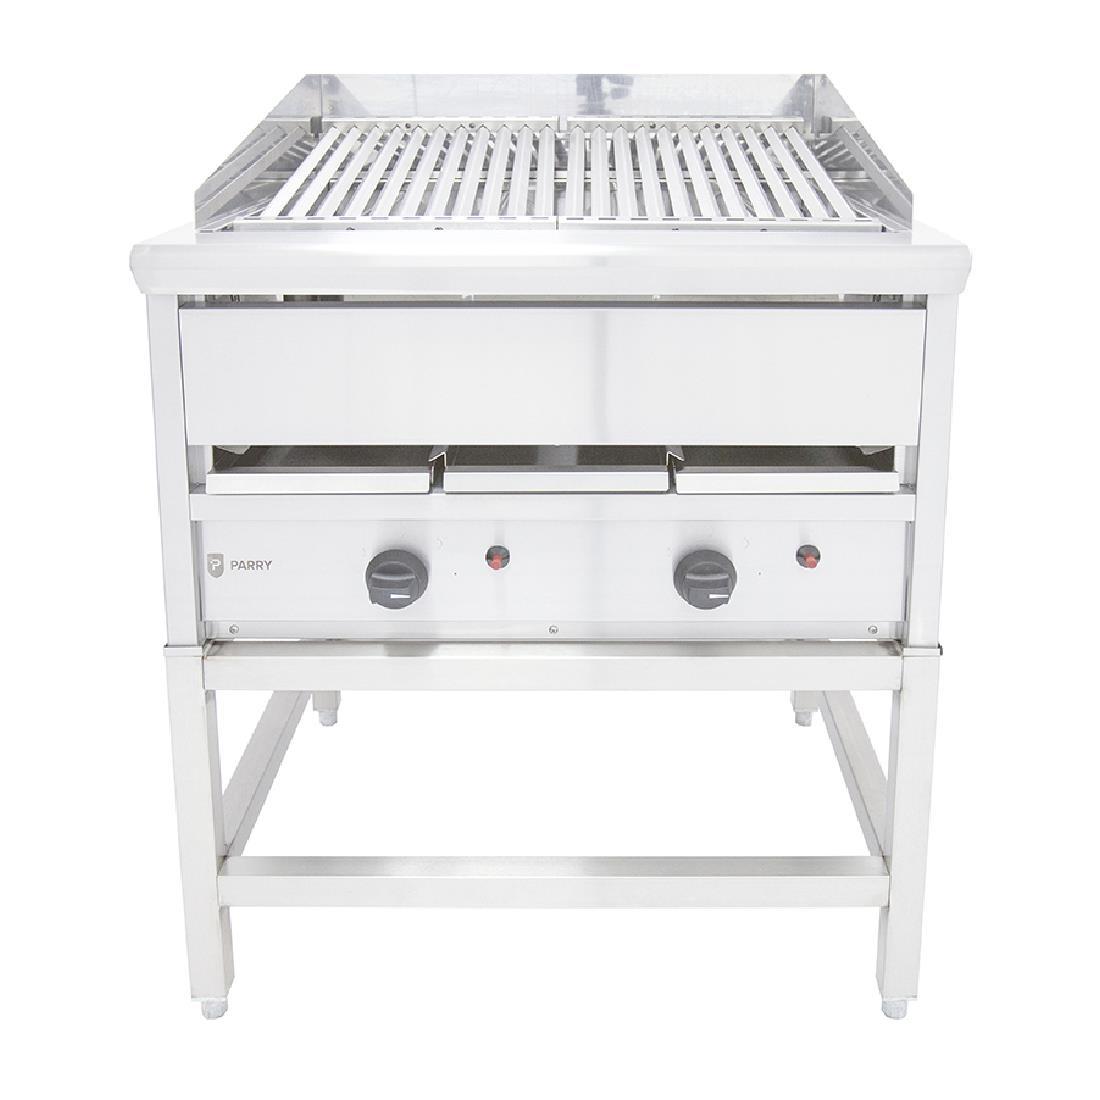 Parry Lava Free Heavy Duty Chargrill UGC8 - GM764  - 1